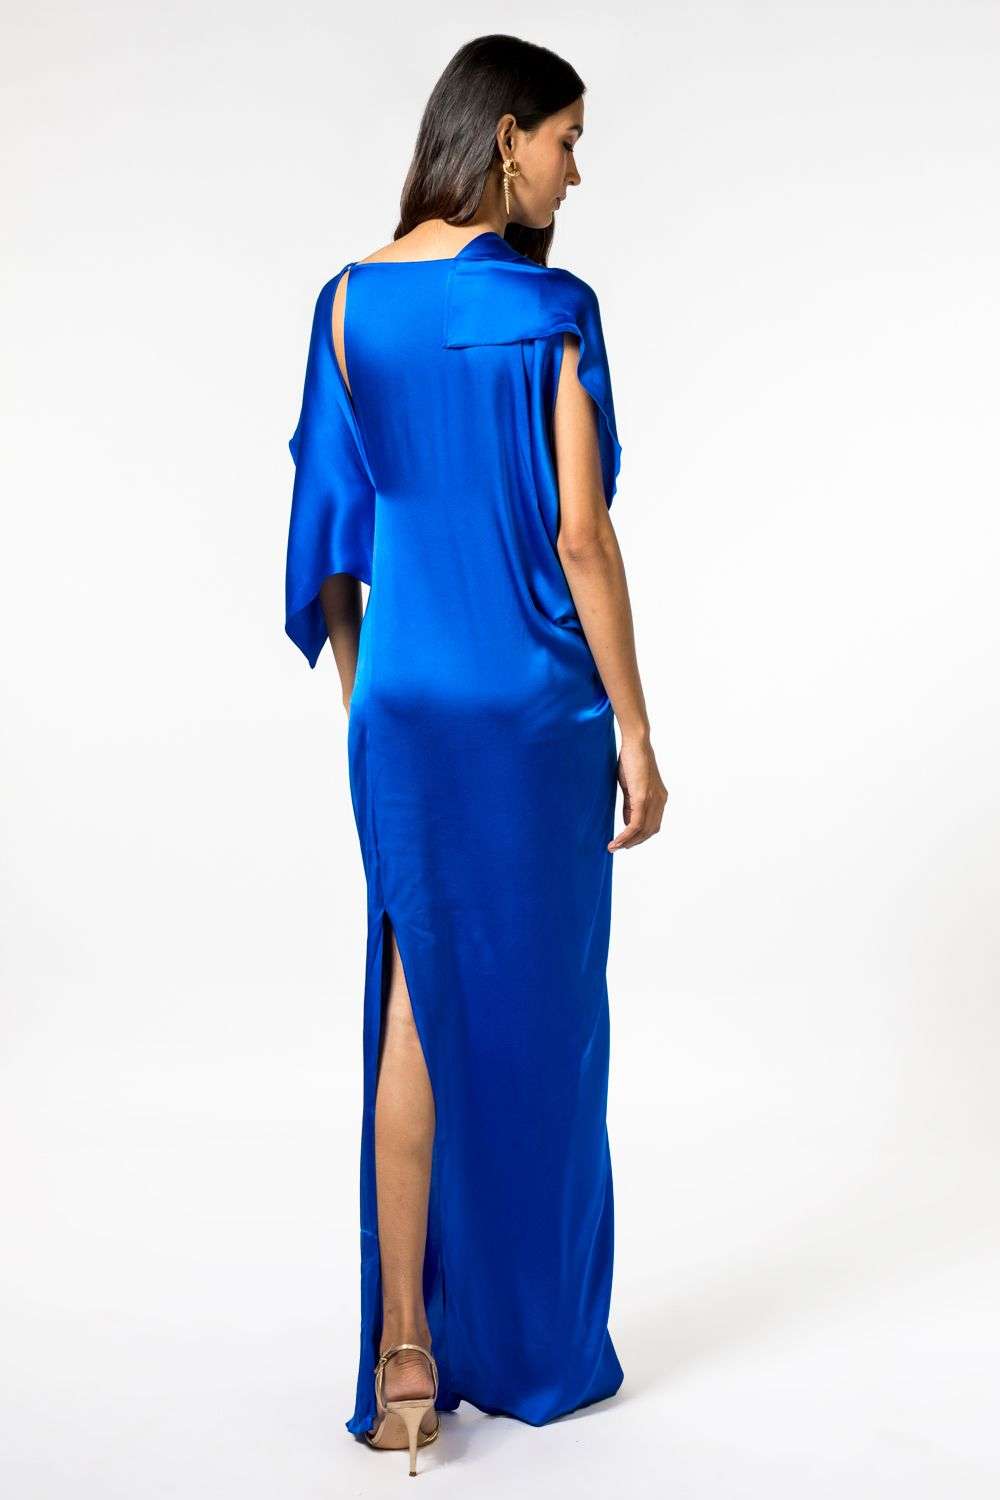 Blue Satin Strapless A-Line Long Prom Dress with Puff Sleeves – Dreamdressy